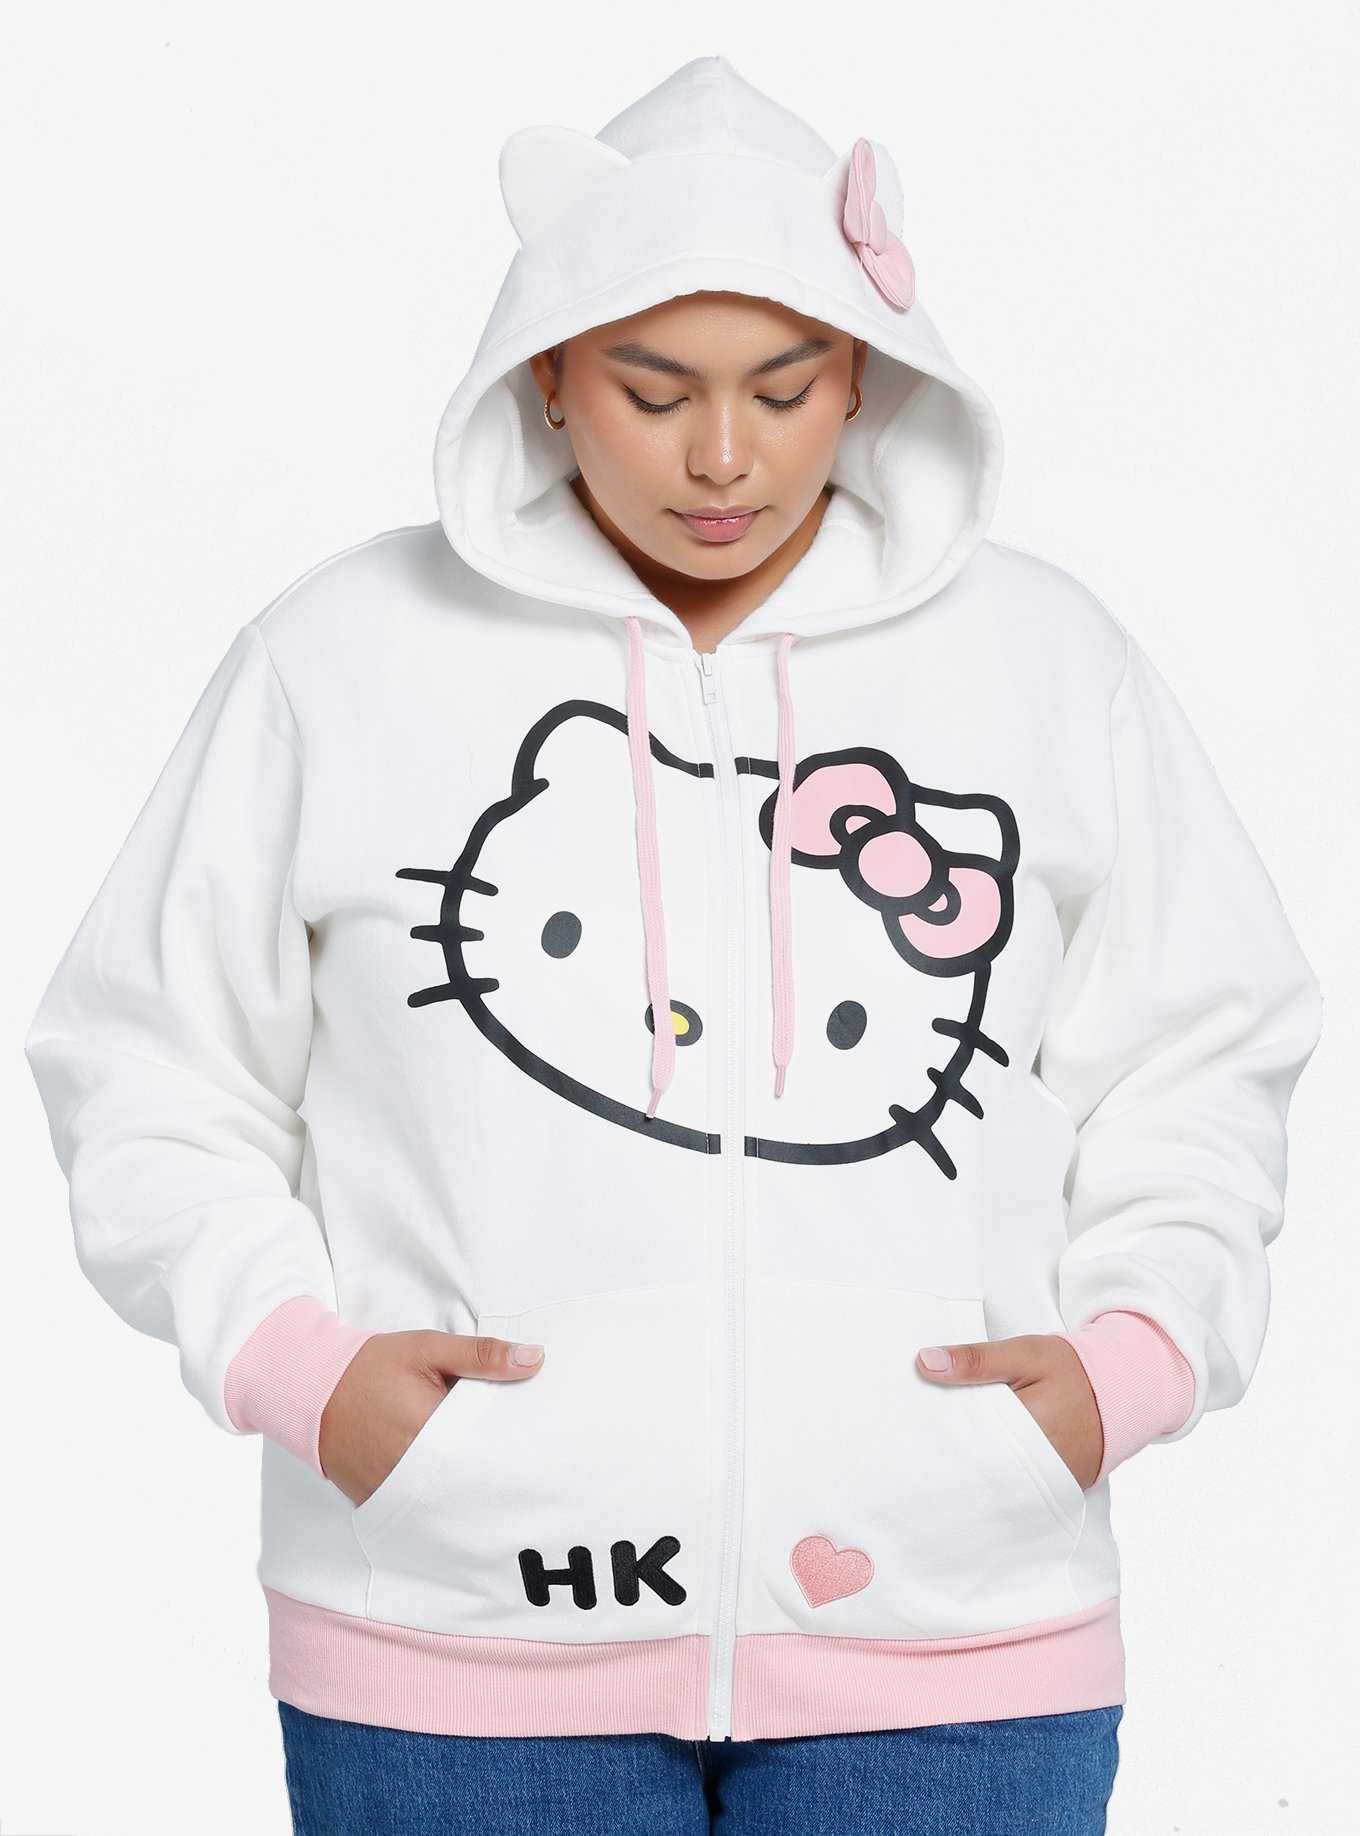 OFFICIAL Hello Kitty Shirts & Merchandise